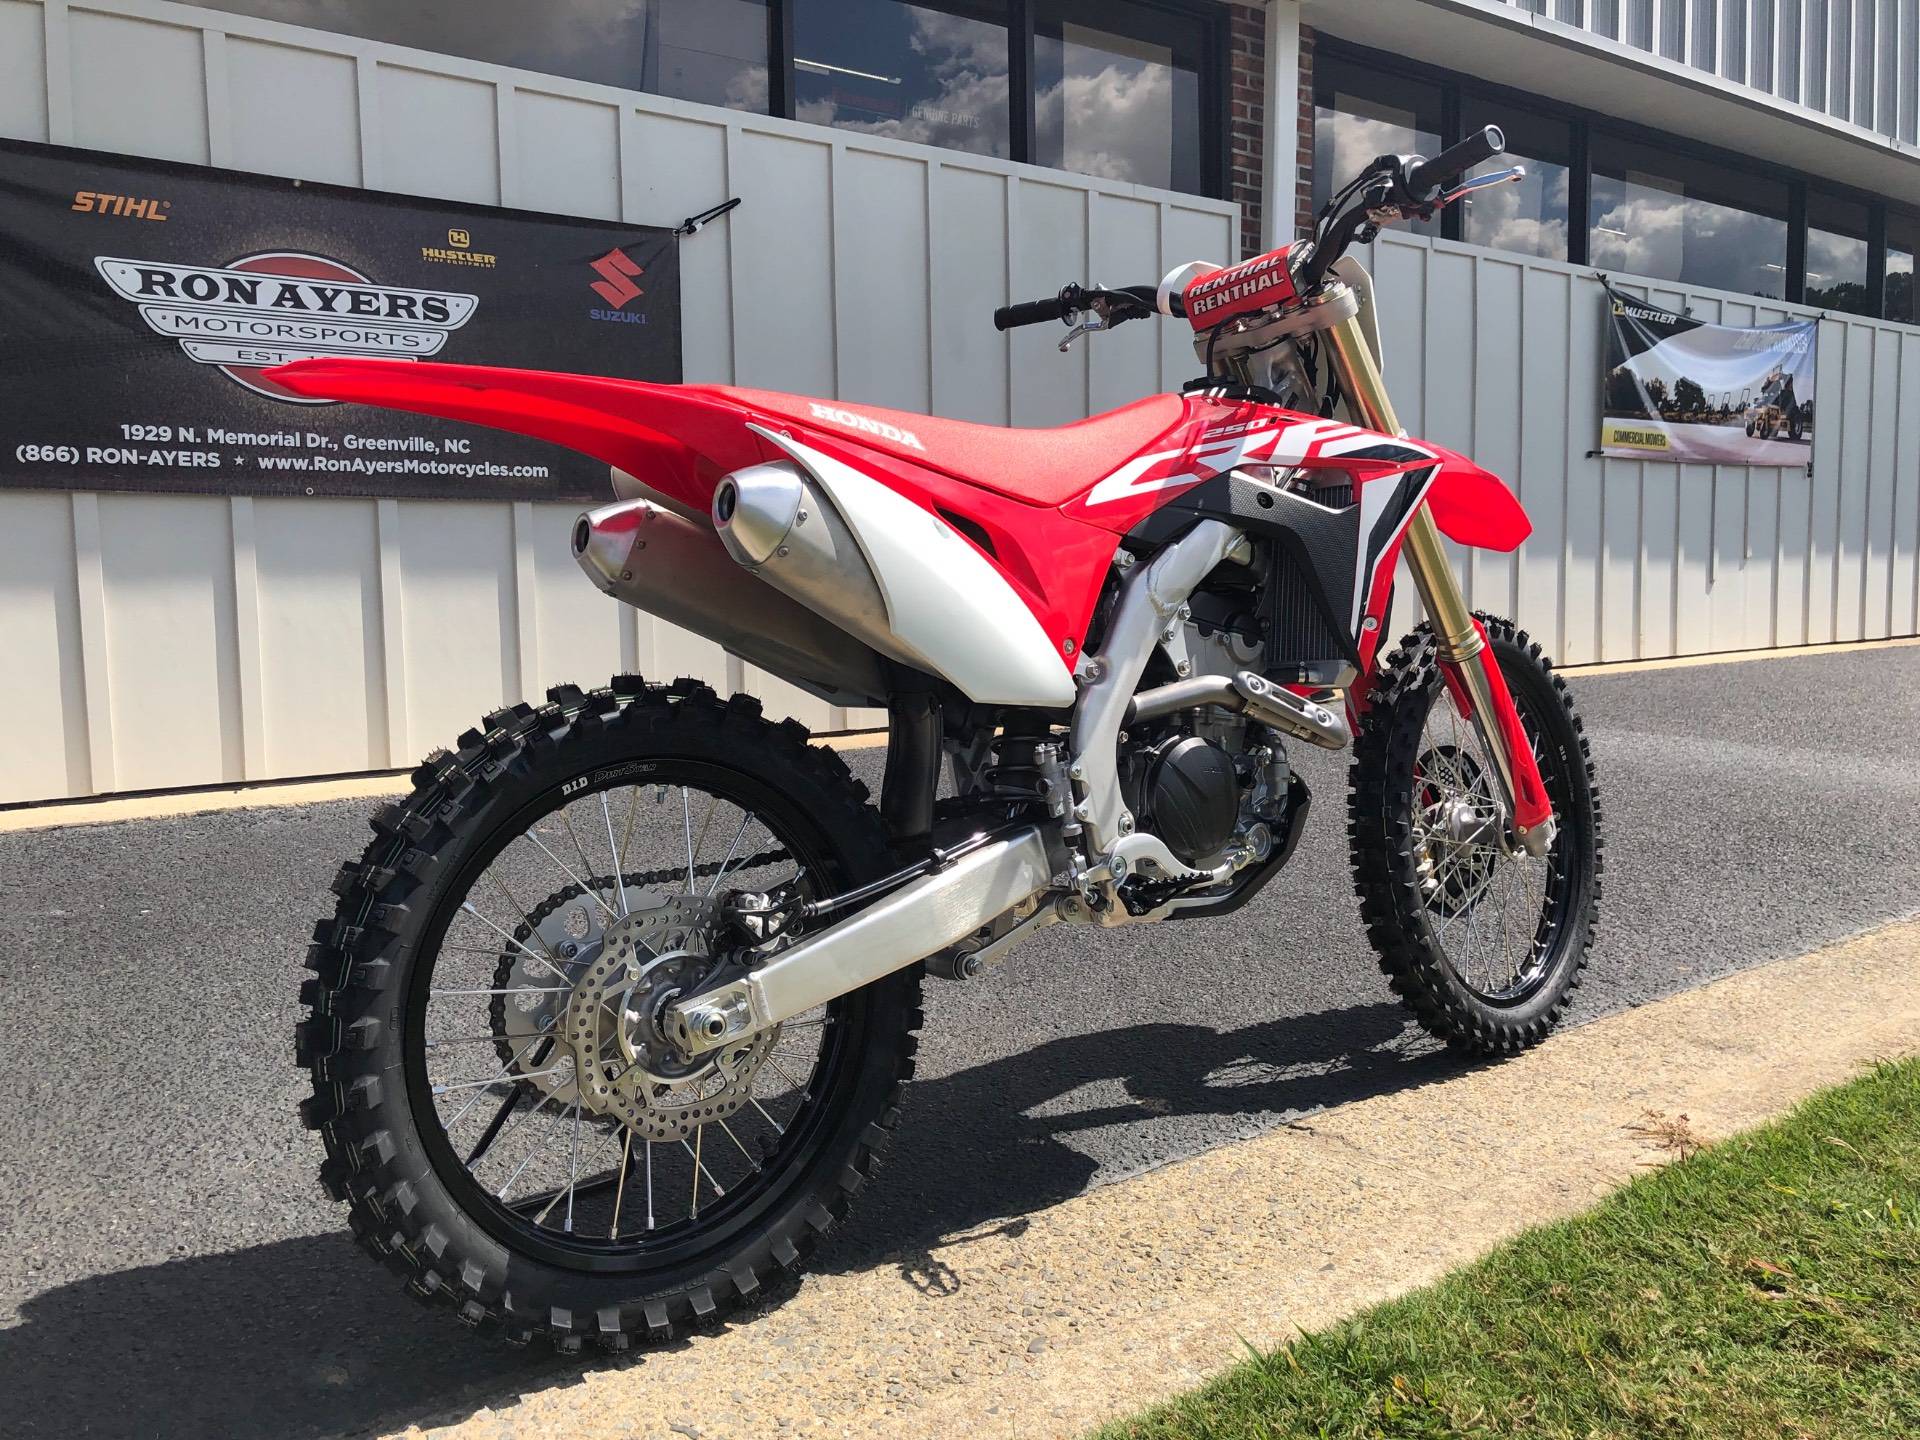 New 2021 Honda CRF250R Motorcycles in Greenville, NC Stock Number N/A